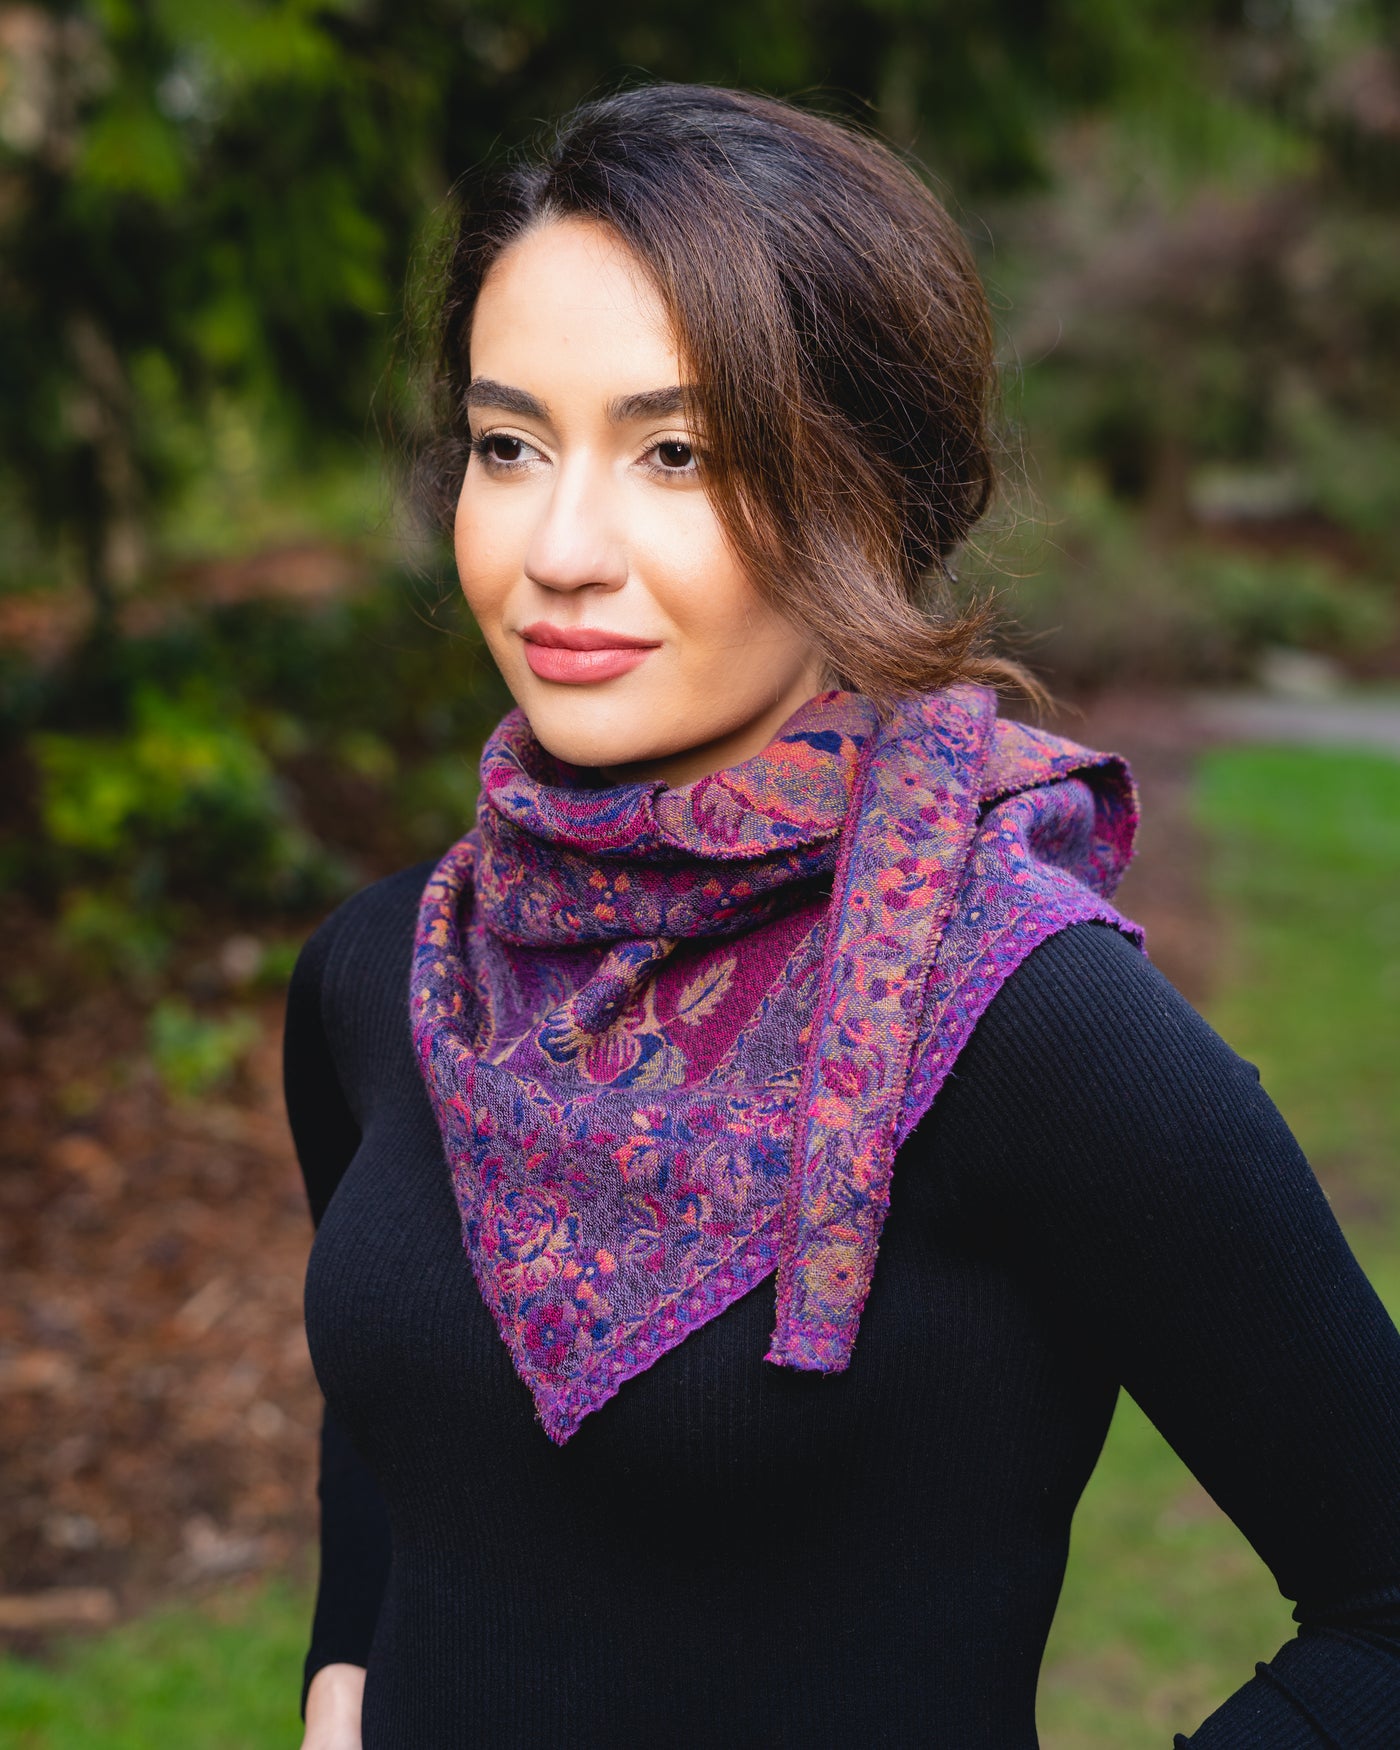 100% Pure Boiled Wool Reversible Pointed Scarf in Plum Purple Colors.